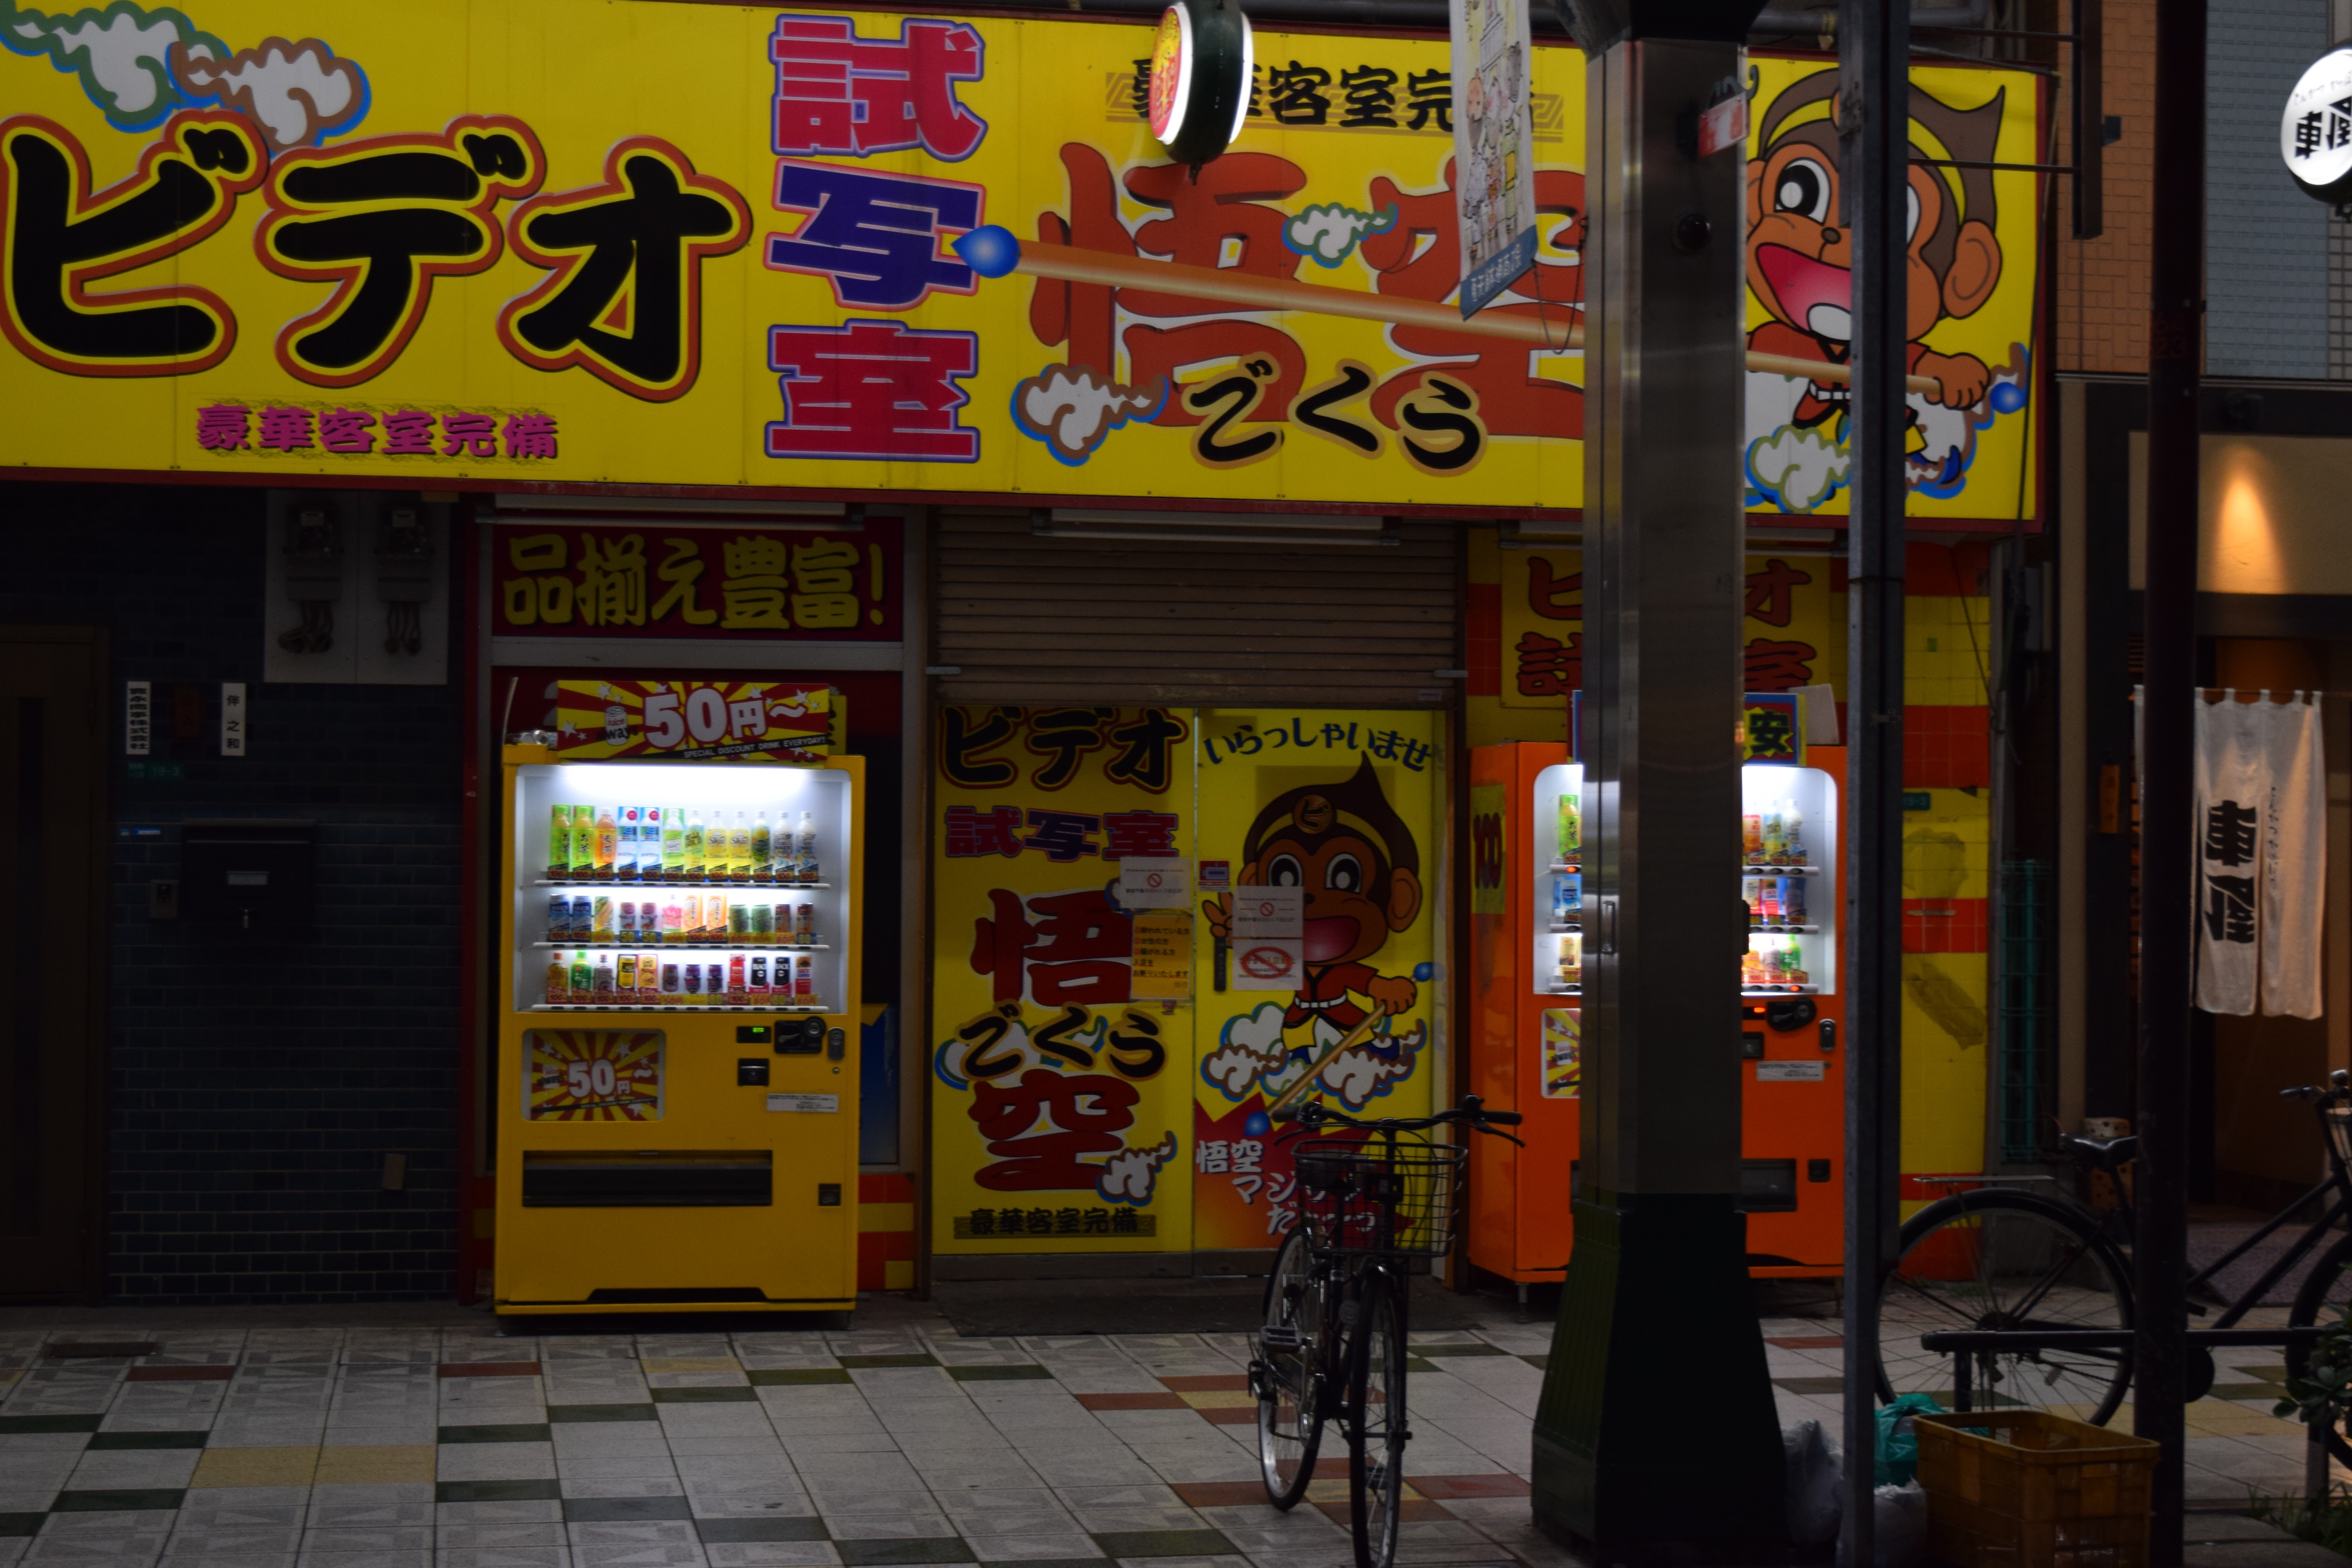 A photo of a 50 yen vending machine in Shinsekai, Osaka. It's yellow and there are lots of yellow signs in the background. There's a (mysterious) video rental shop in the background and a parked bicycle in the foreground.